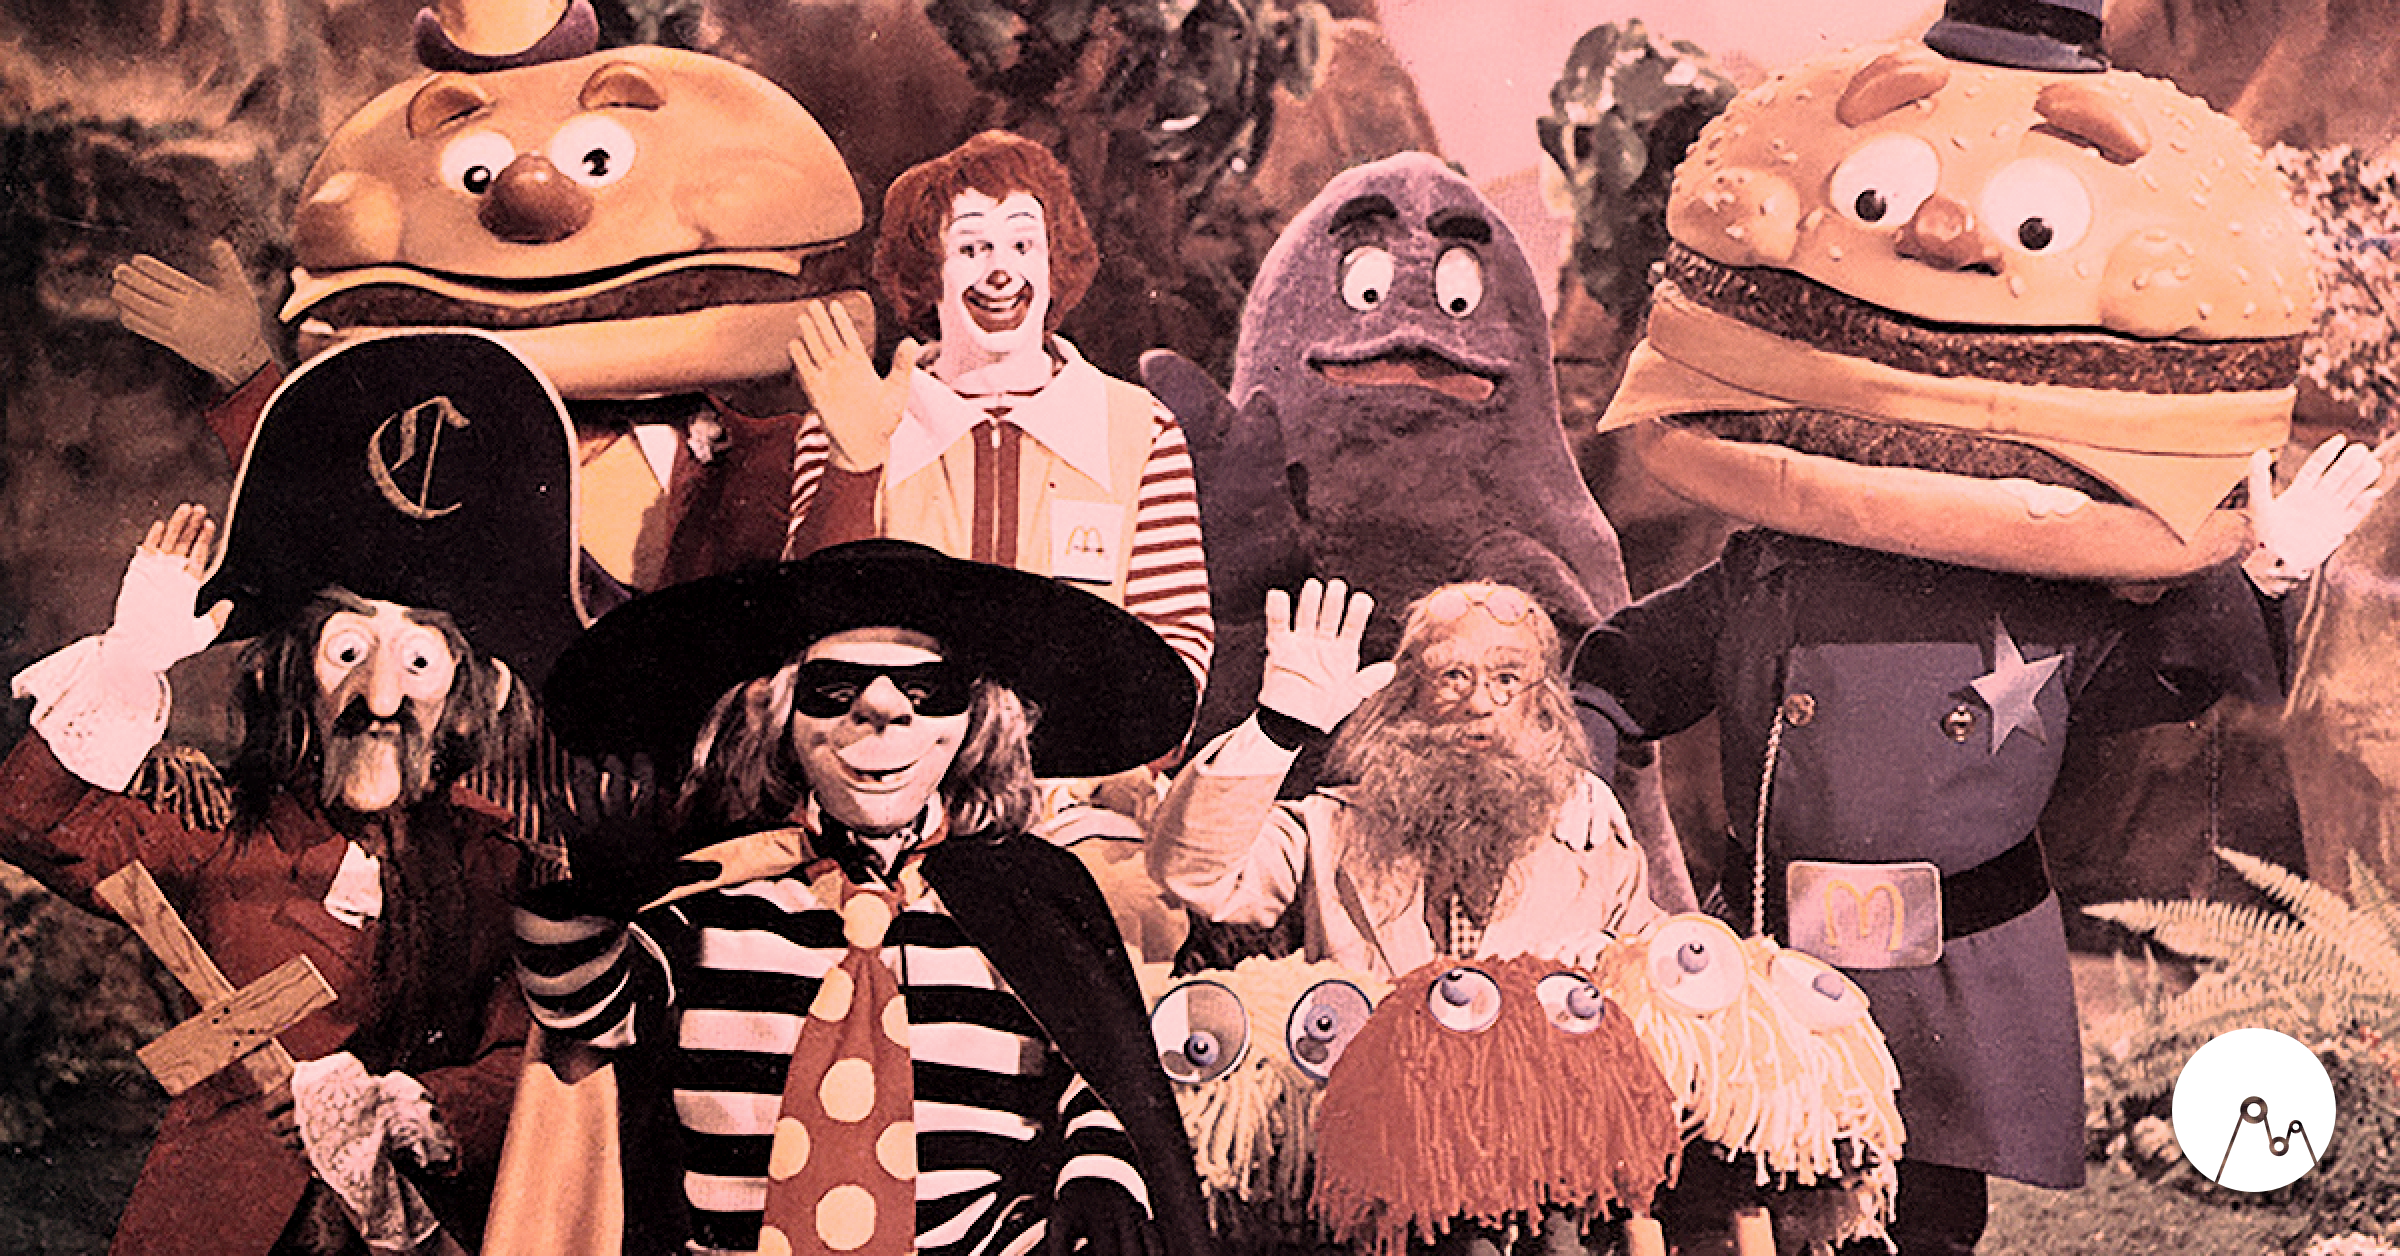 The original look and feel of the Hamburglar, Mayor McCheese, and other friends